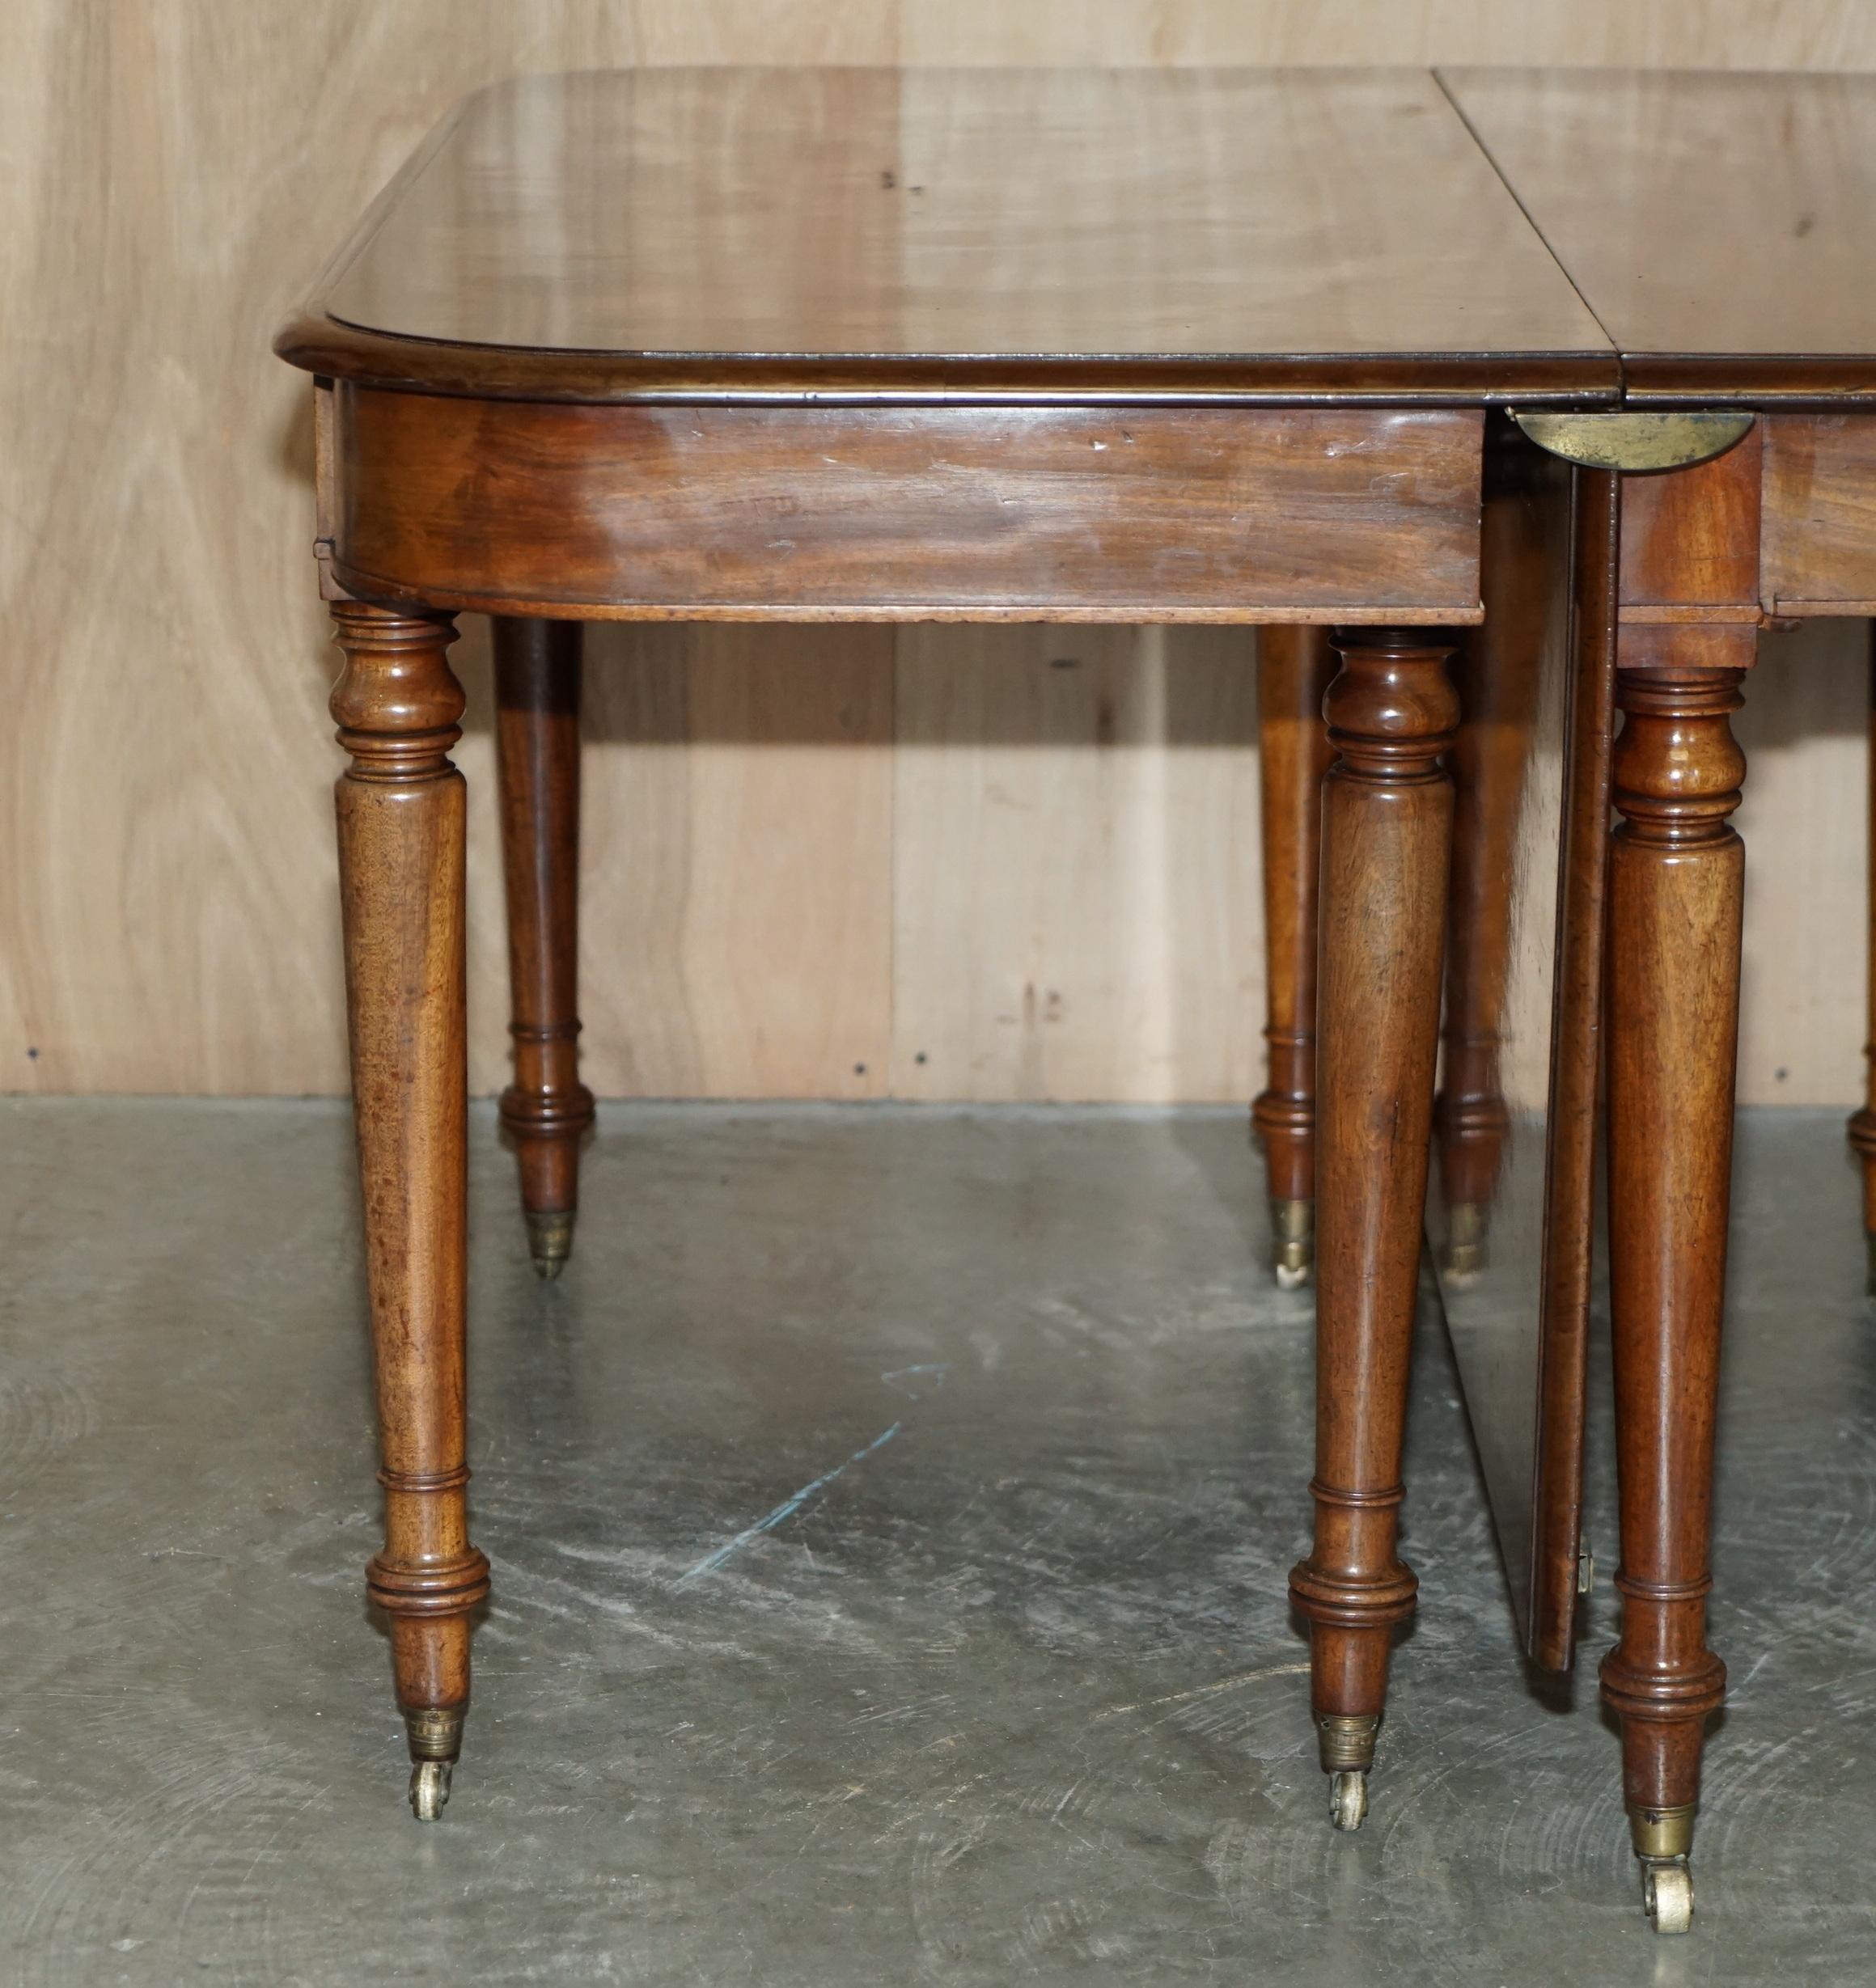 English Antique George III 1820 Flamed Hardwood Fully Restored Extending Dining Table For Sale